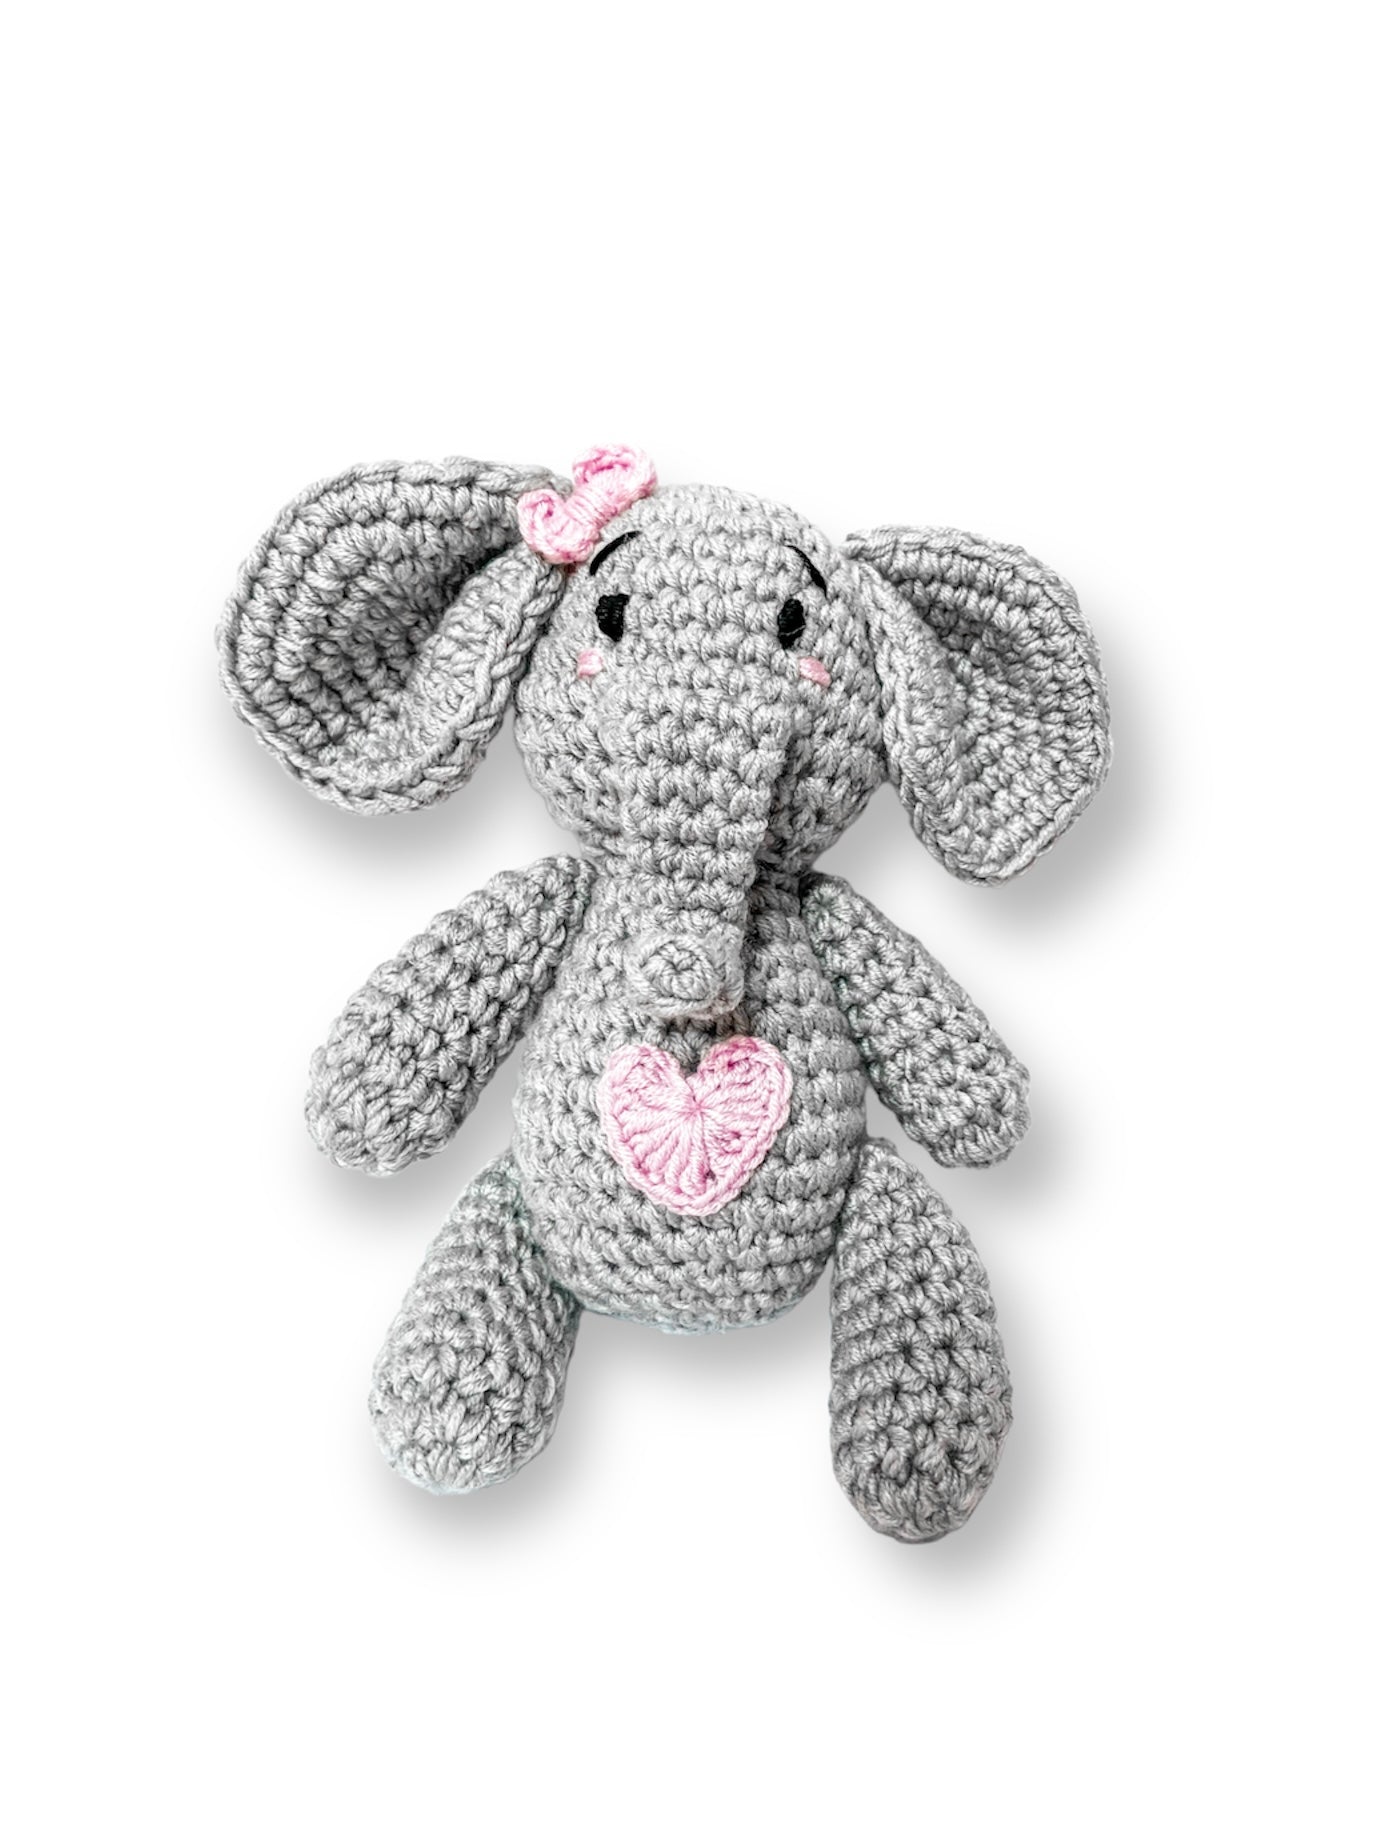 Elephant Girl Toy - triconuts